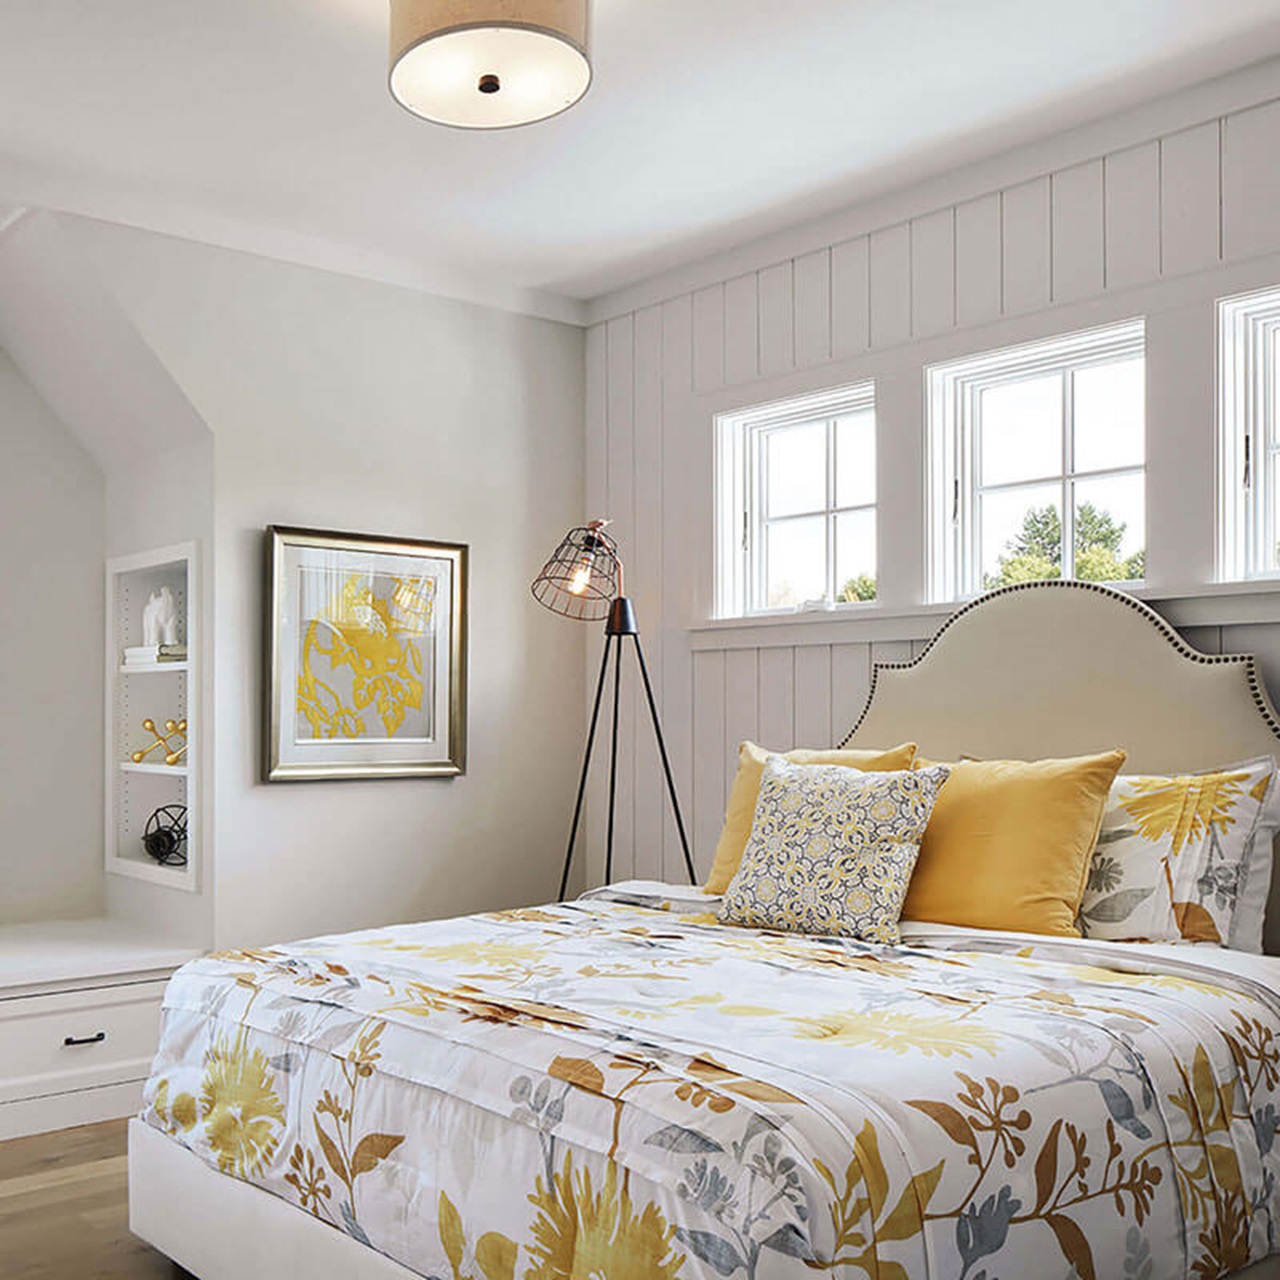 Bright Bedroom with Marvin Elevate Awning Windows